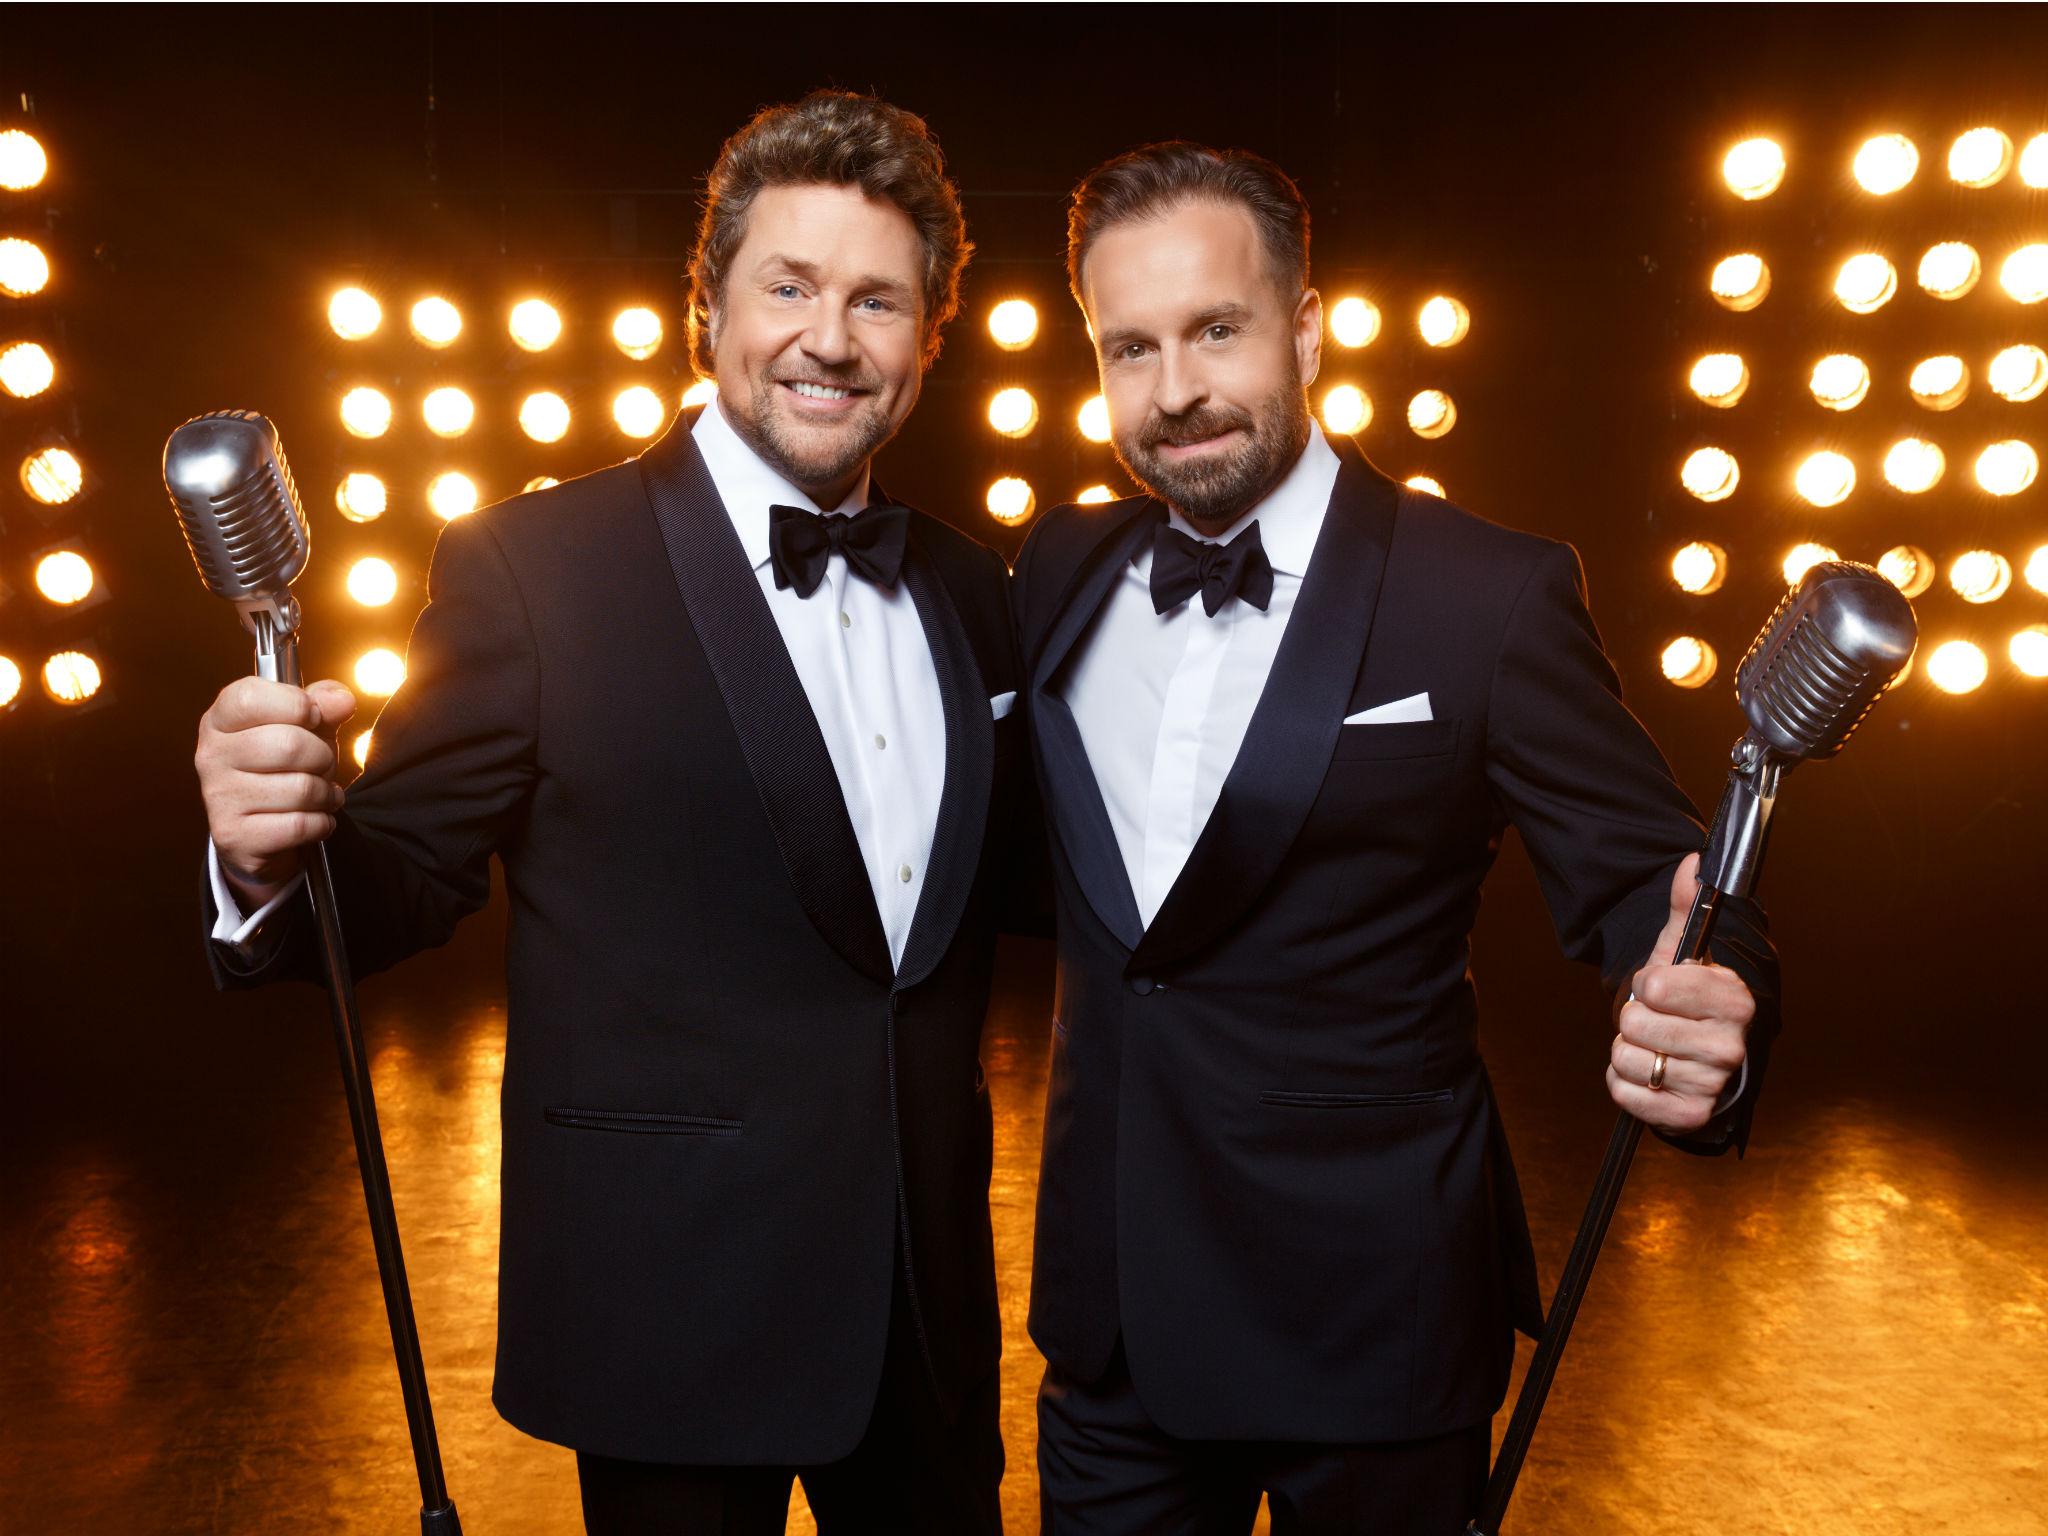 A defiantly uncool, unthreatening approach is one of the many reasons why Ball and Alfie Boe have become so popular as a duo